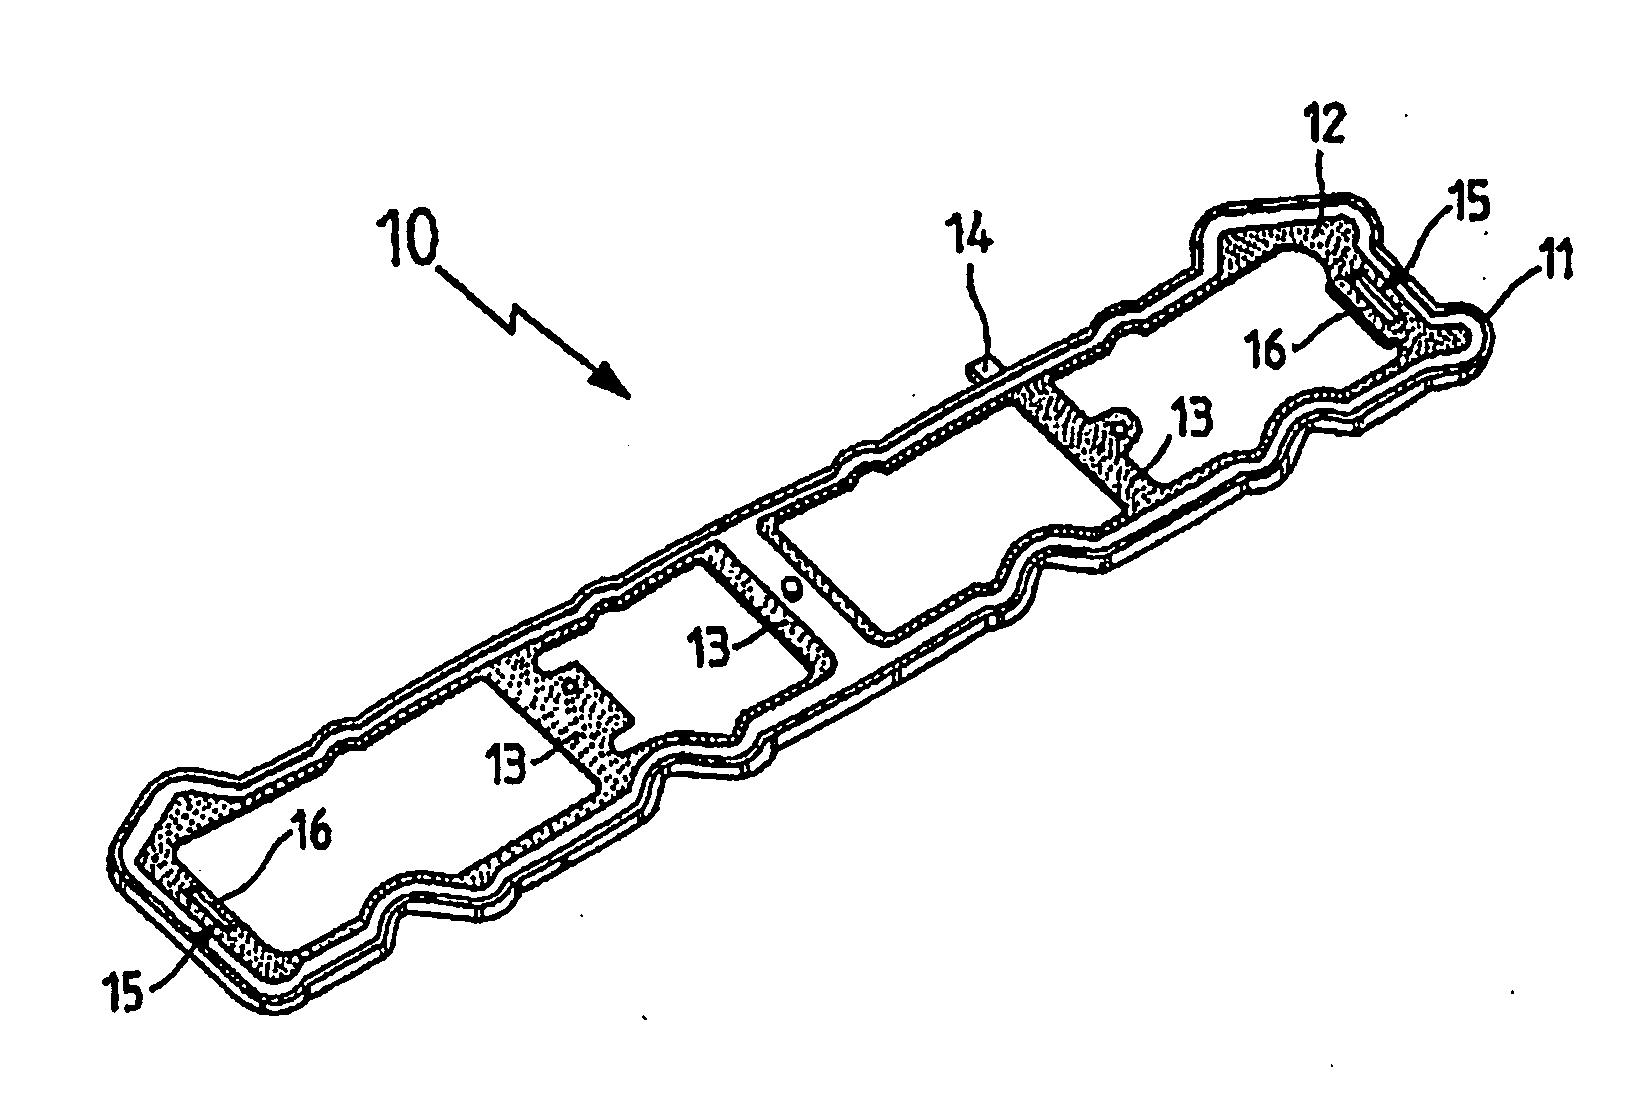 Gasket for sealing a connection between two molded parts